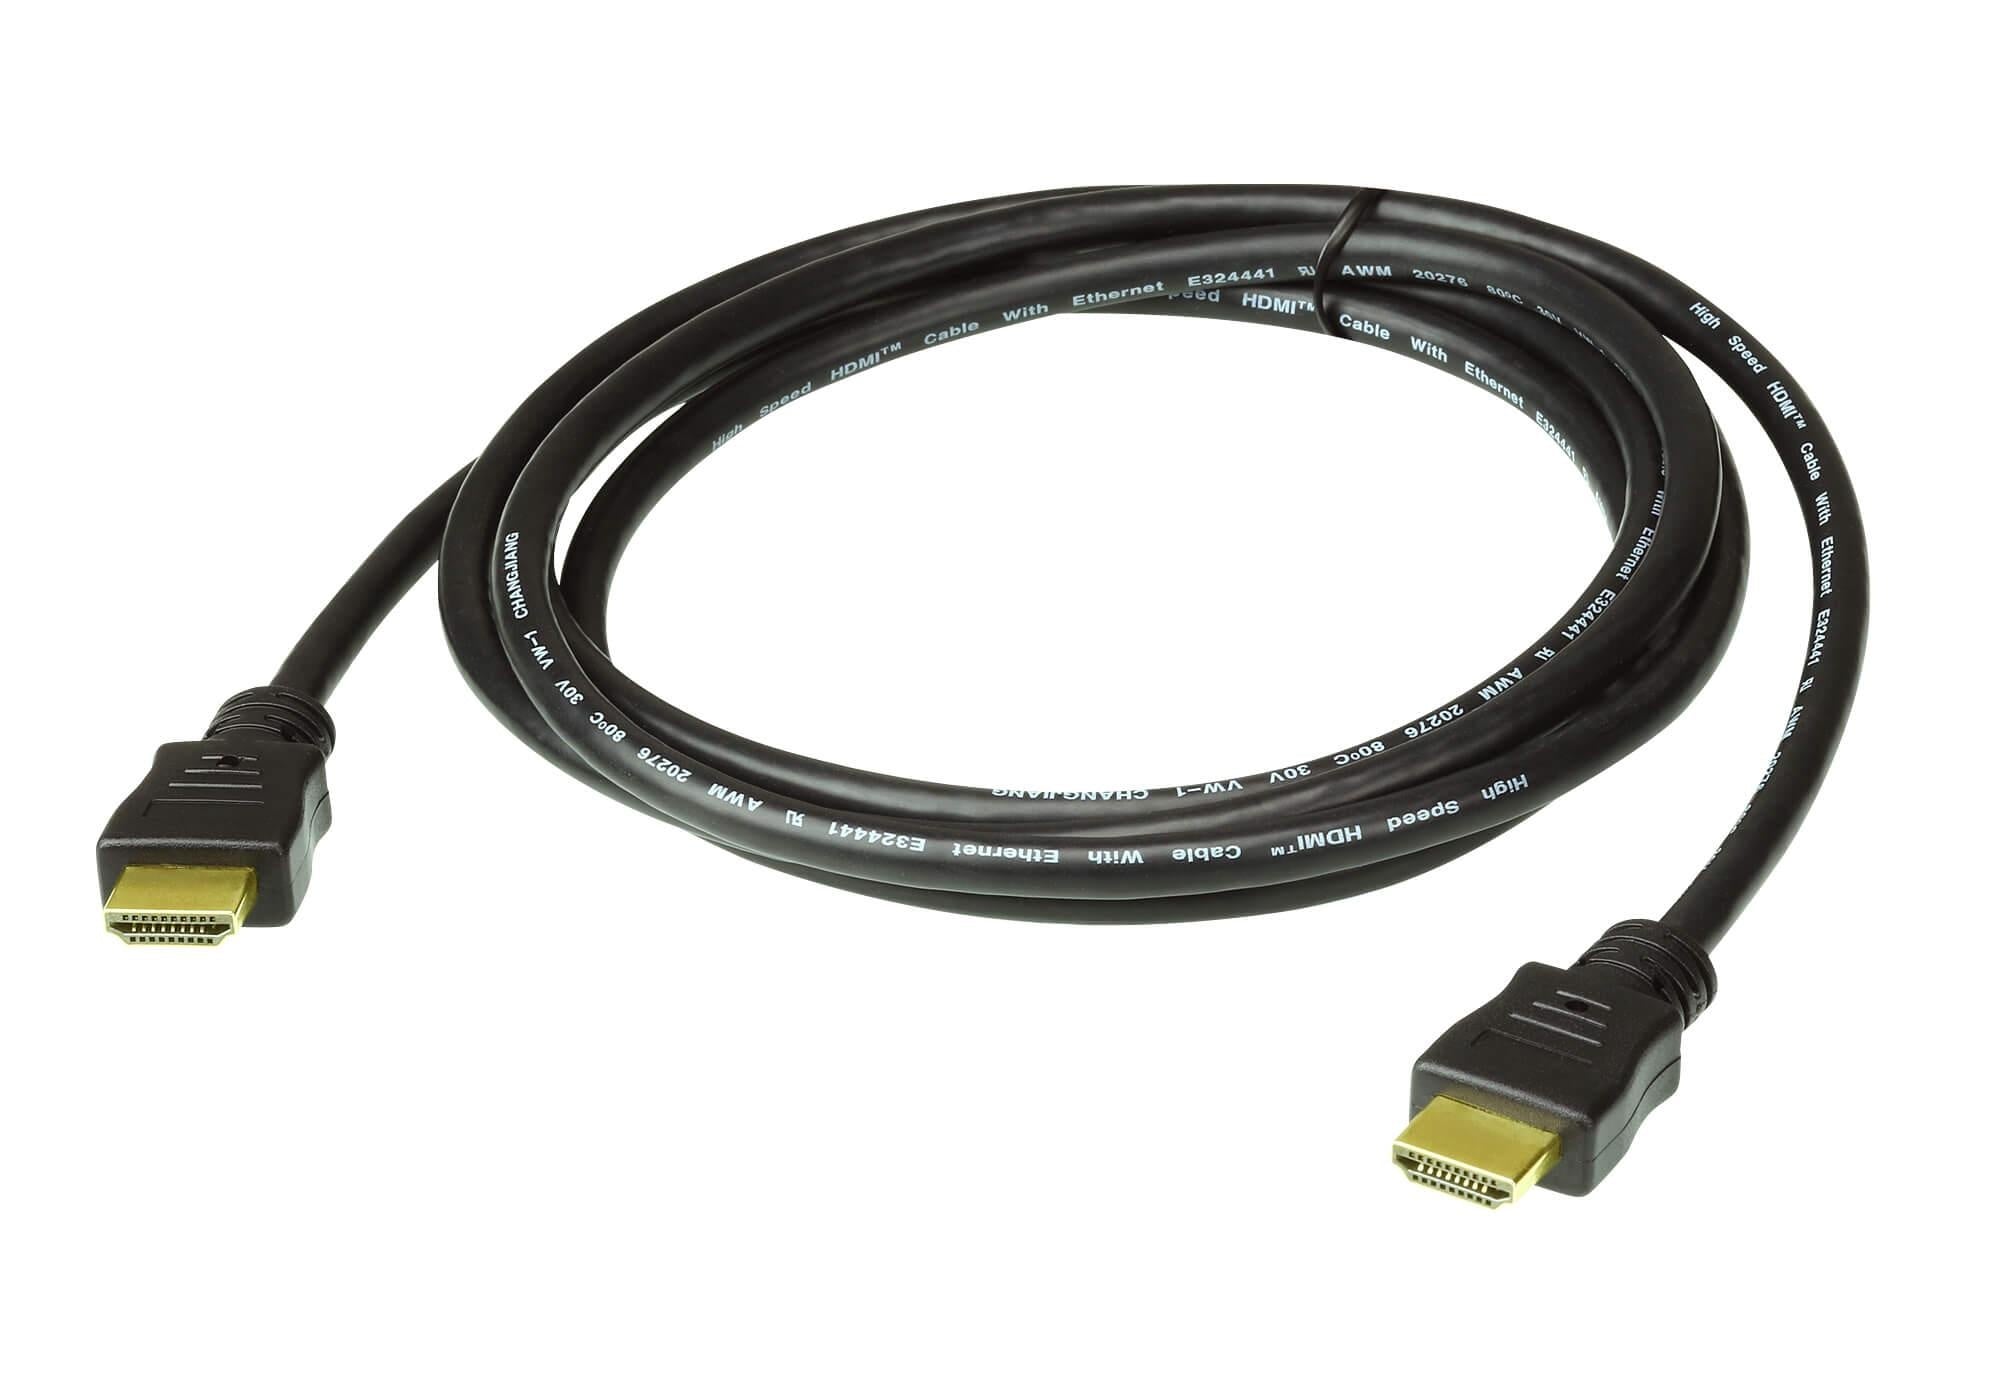 ATEN Premium 5m High Speed HDMI Cable with Ethernet, supports up to 4096 x 2160 @ 60Hz, High quality tinned copper wire gold plated connectors ATEN